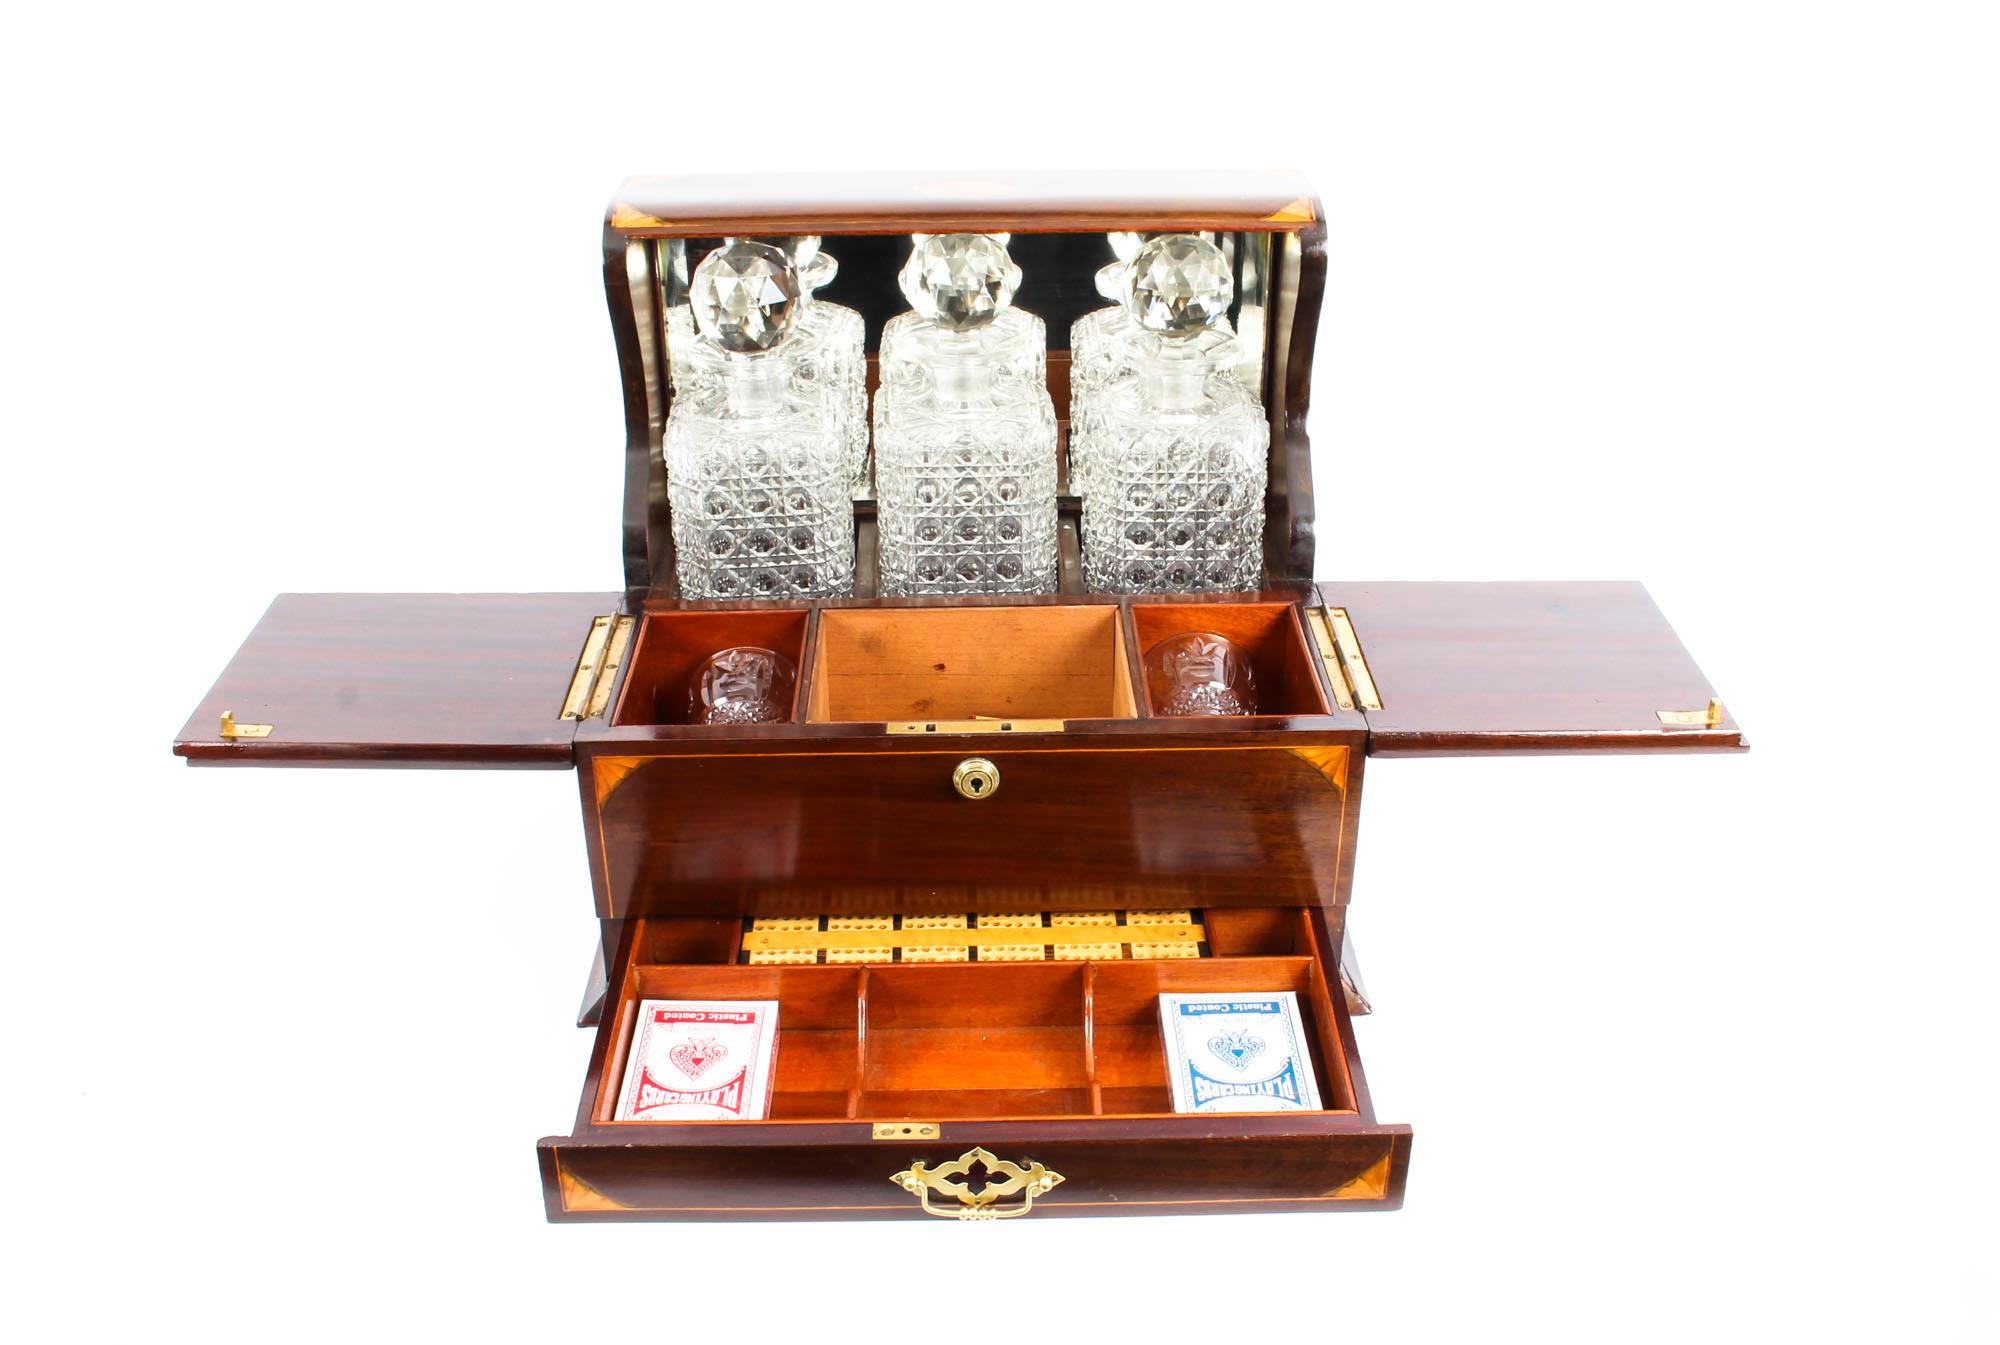 This is a superb antique Victorian mahogany cased three decanter Tantalus with decorative inlaid decoration, circa 1870 in date.

It was skillfully crafted in mahogany with beautiful shell and line inlaid decoration, stylish silver plated handles